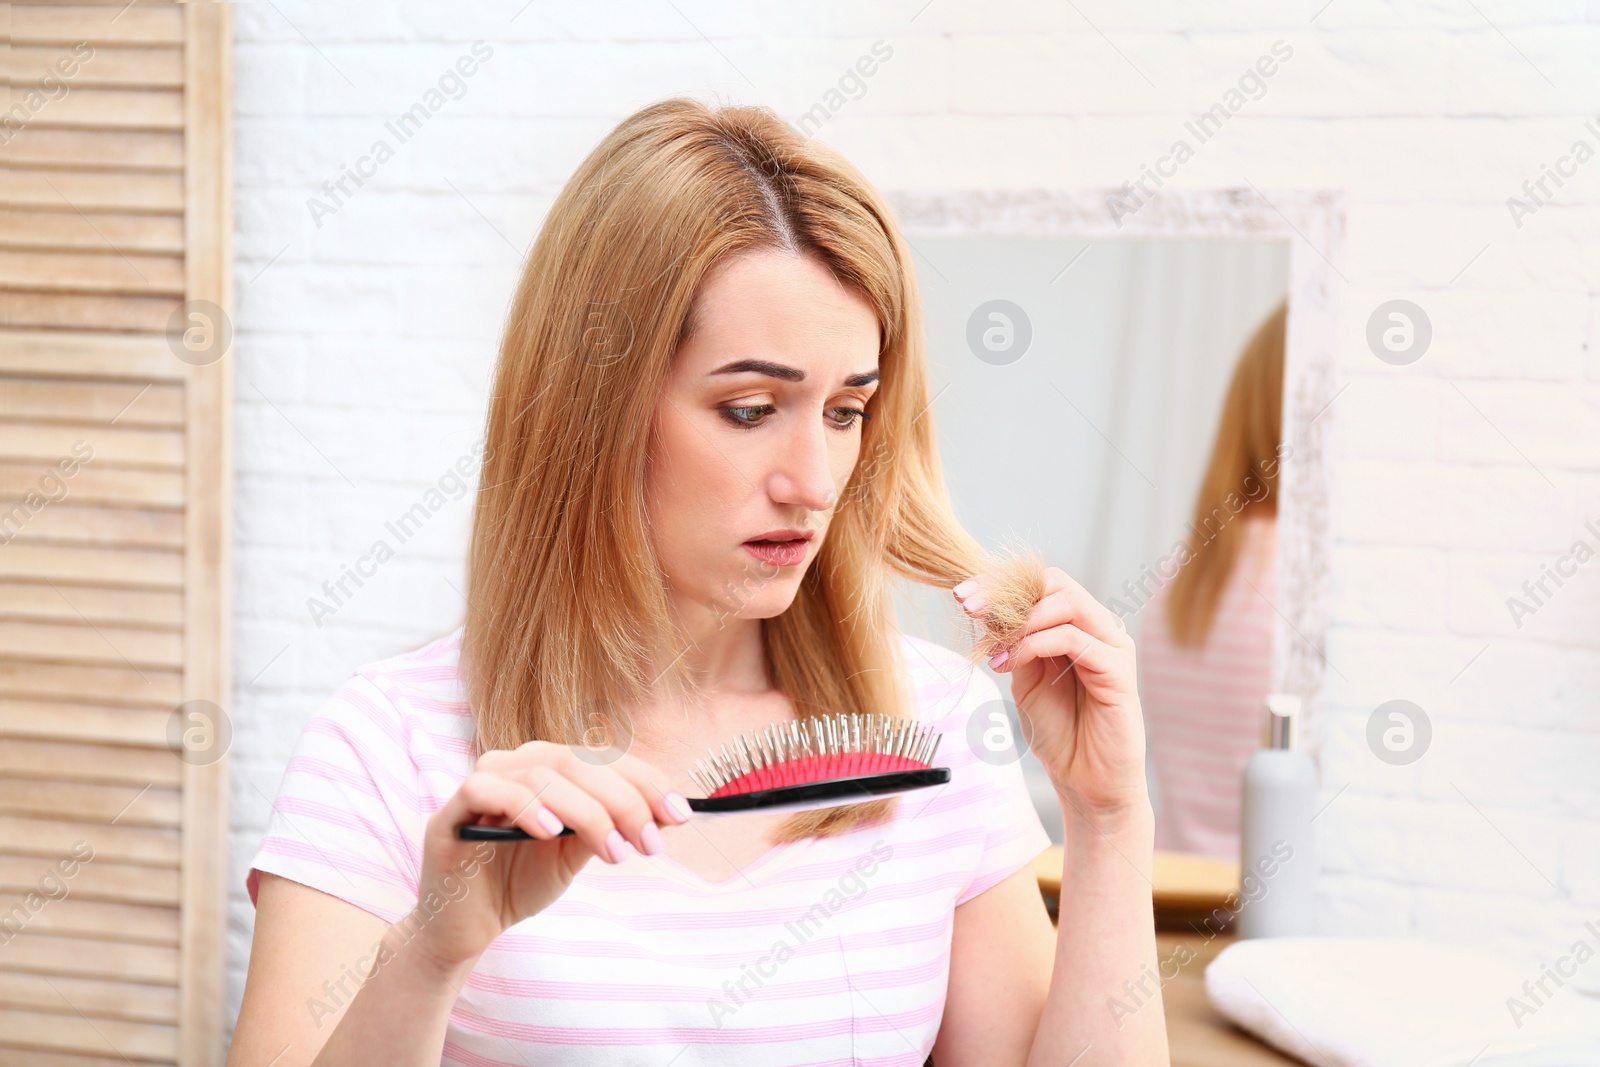 Photo of Emotional young woman brushing hair in bathroom